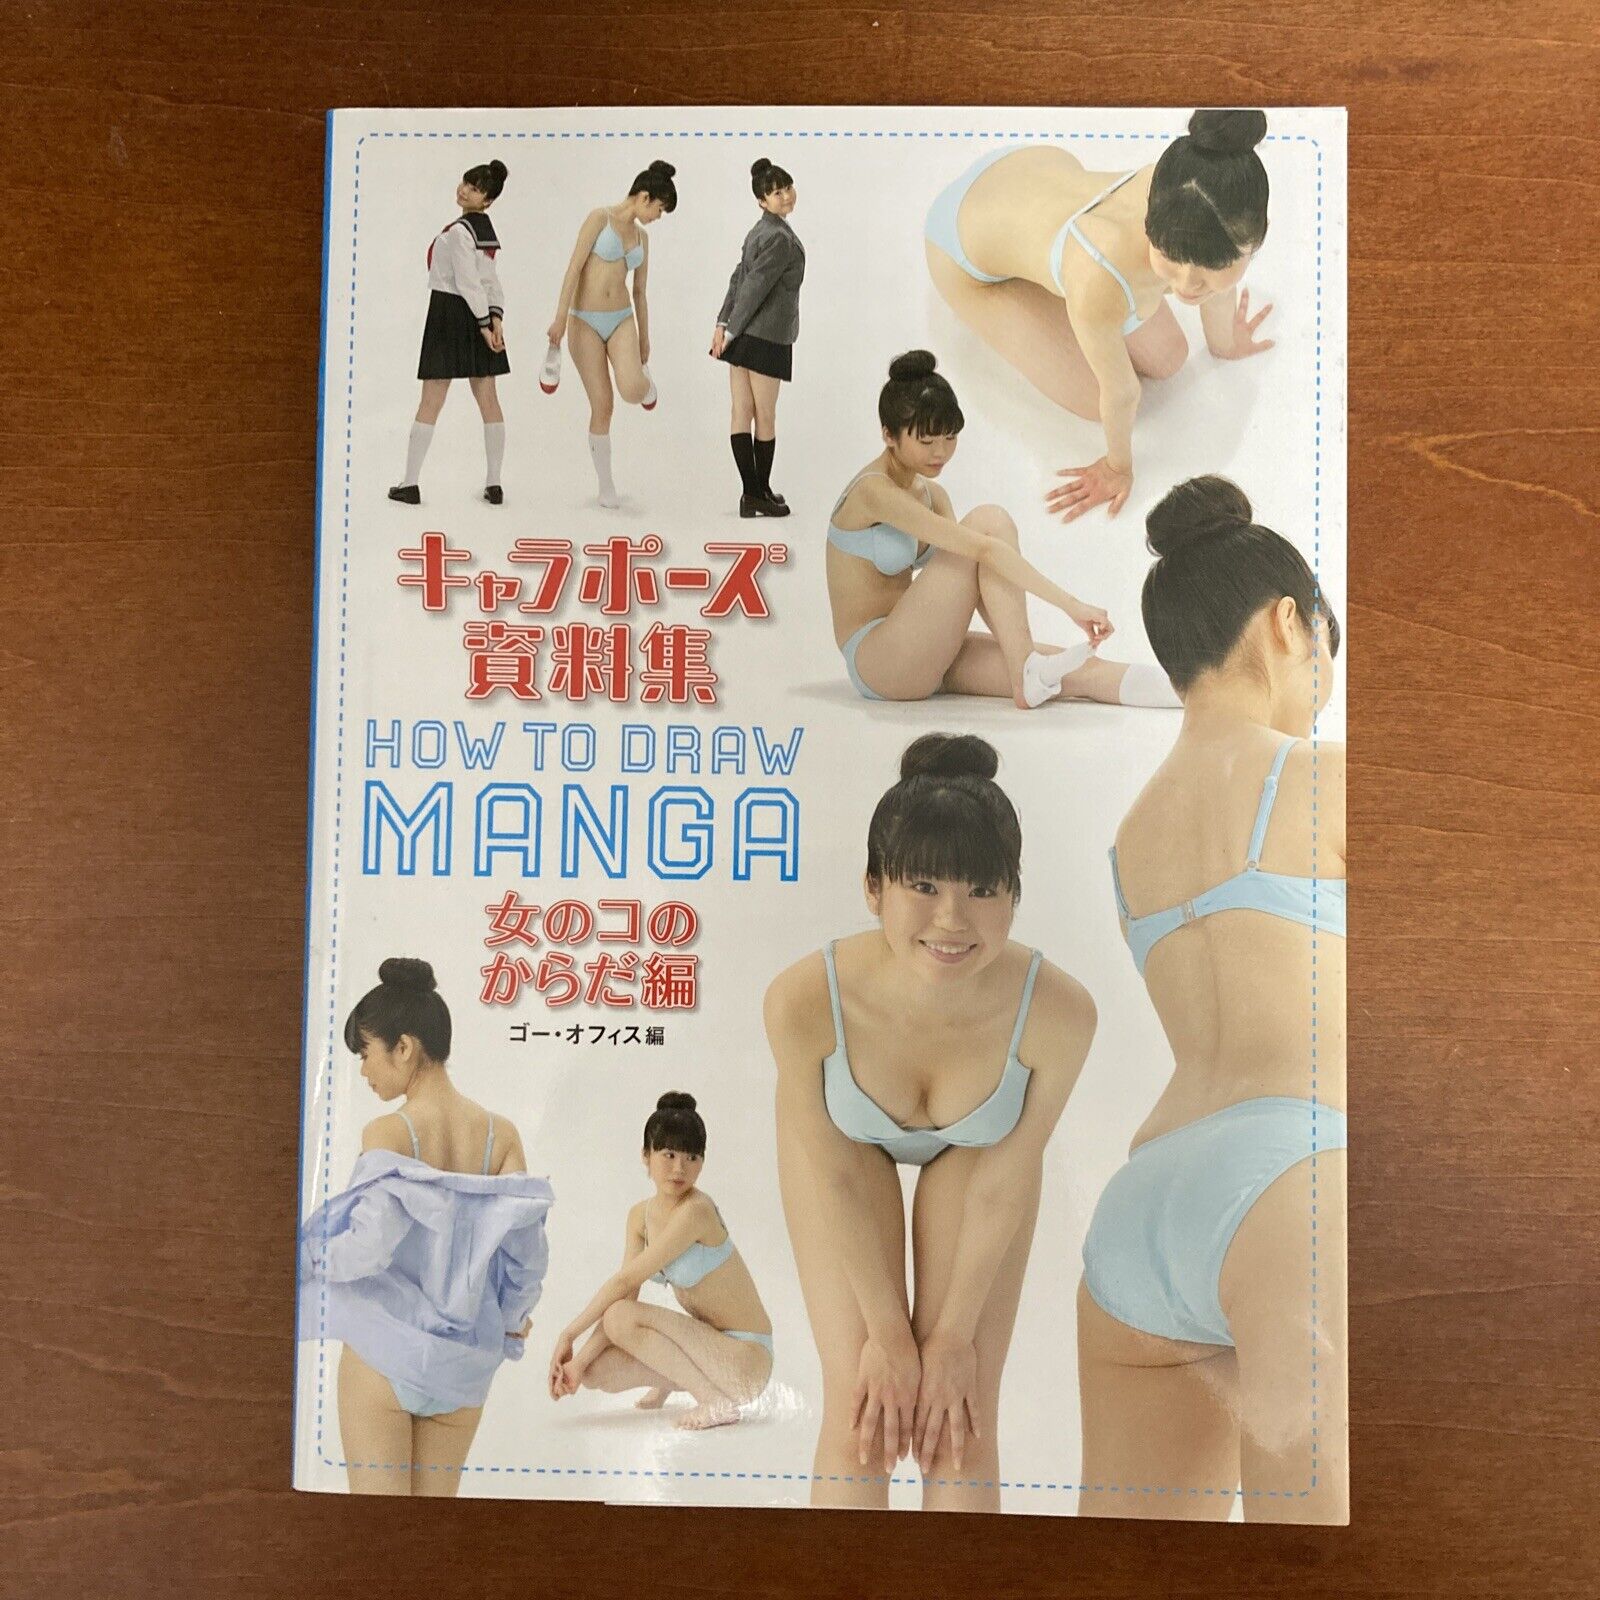 How to Draw Manga Anime Character Pose Book Girl's Body Art Guide Book